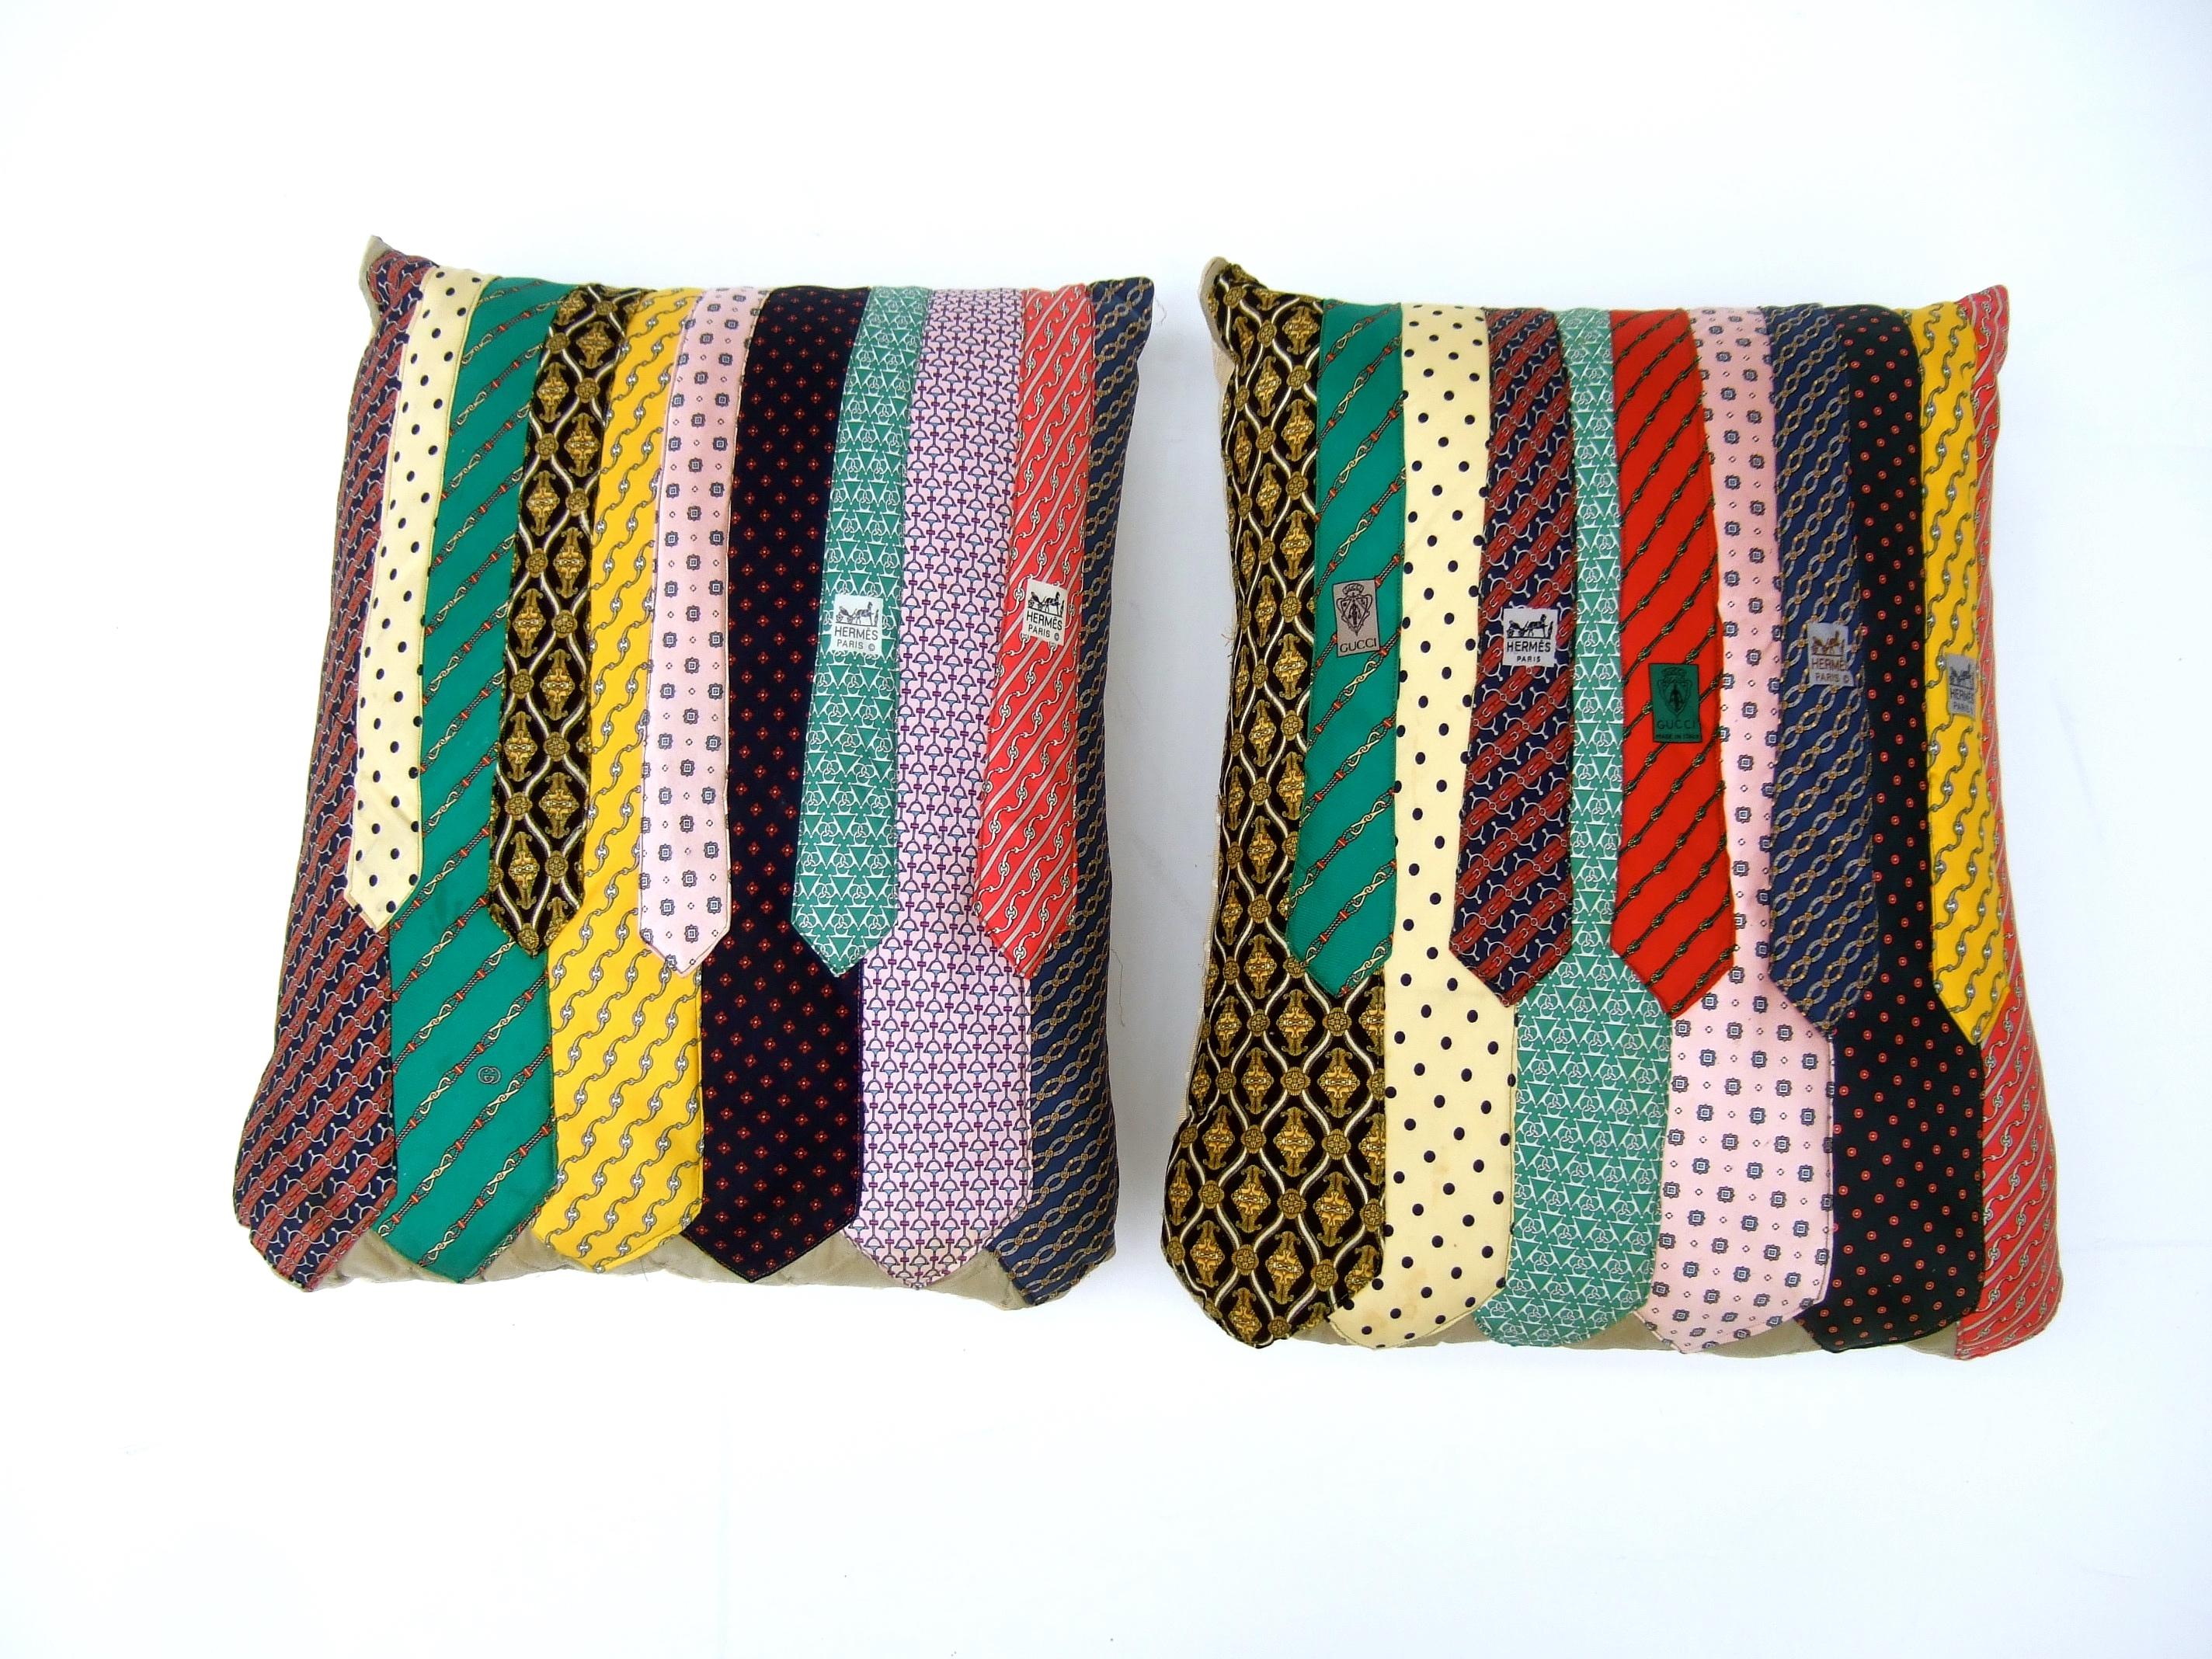 Pair of Vintage Hermes & Gucci Silk Necktie Up-cycled Handmade Pillows c 1980s  For Sale 6